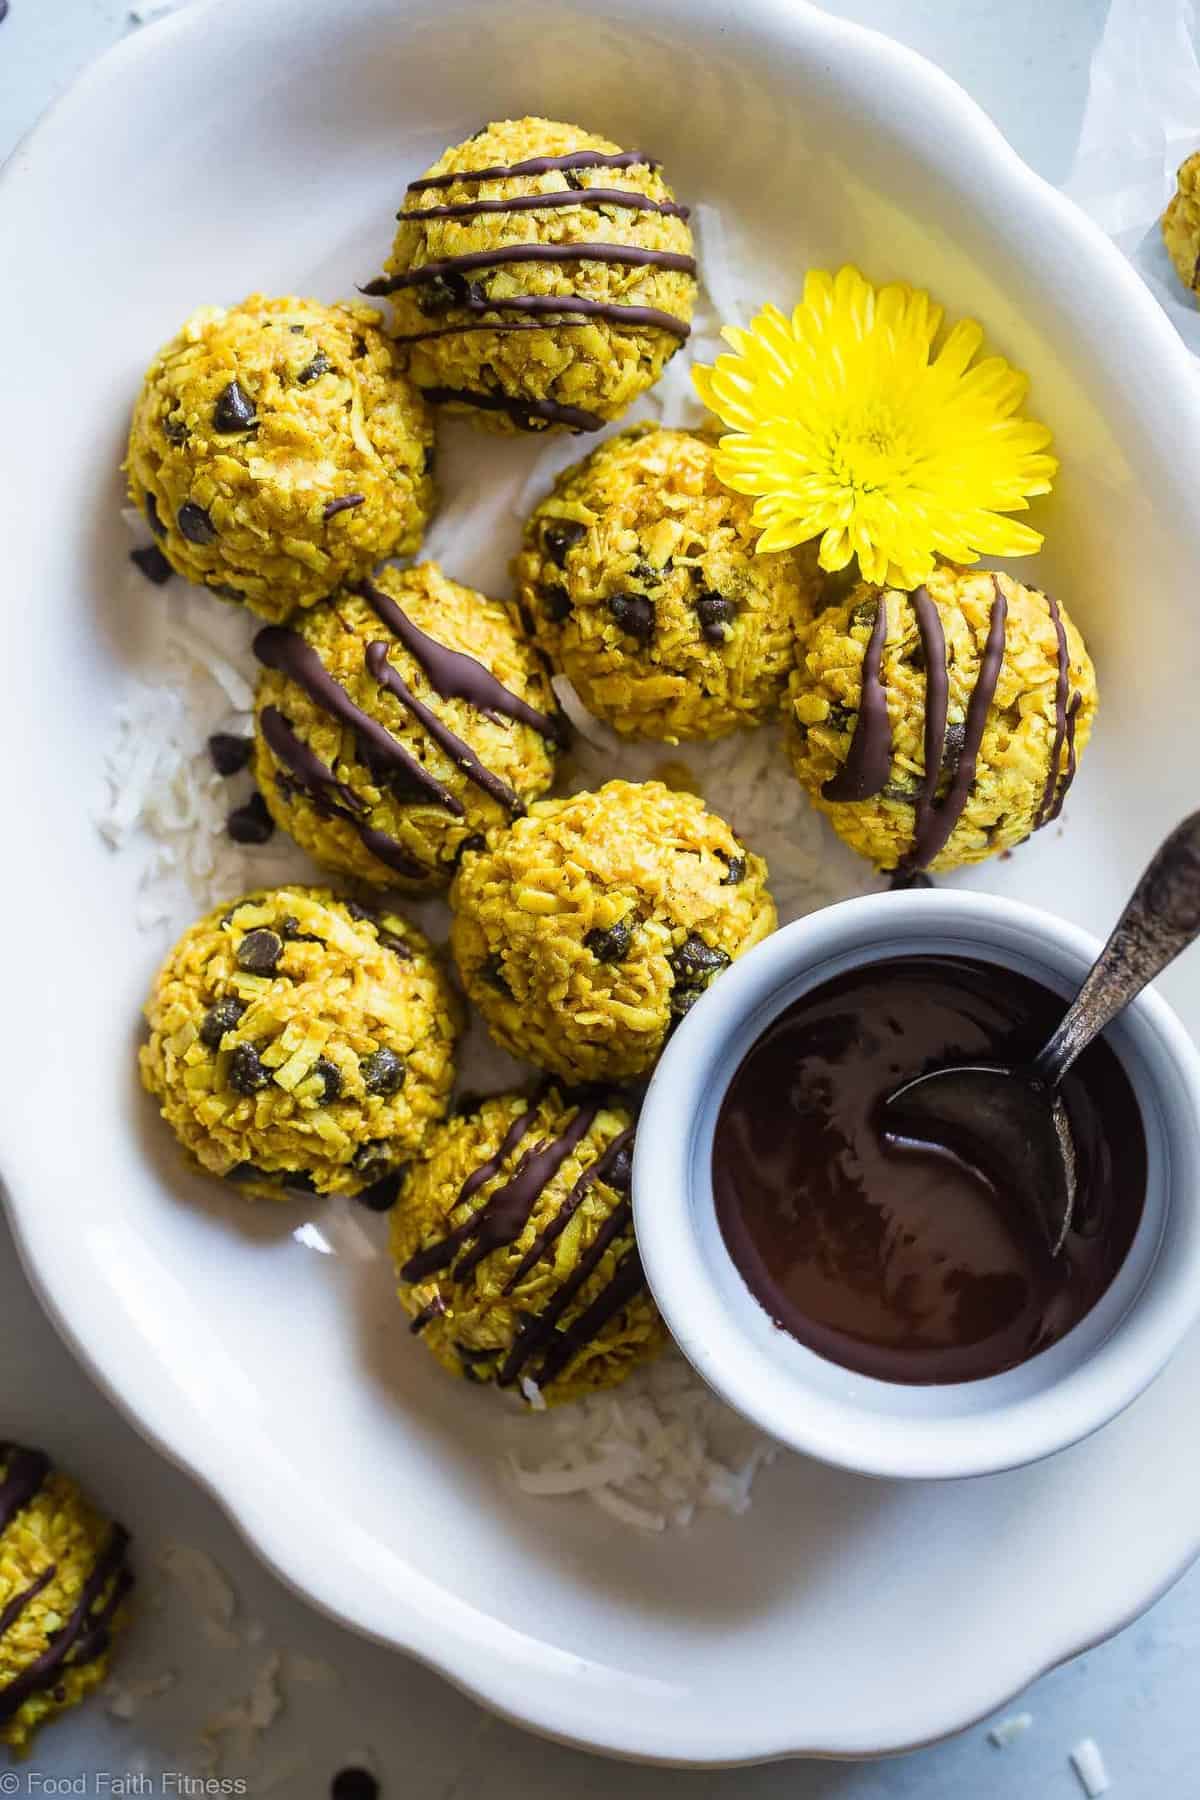 No Bake Turmeric Almond Coconut Macaroons -  These easy, 6 ingredient cookies have addicting spicy-sweet flavors from turmeric, almond butter and chocolate chips! They're a paleo, vegan and gluten free treat that is secretly anti-inflammatory! | #Foodfaithfitness | #Paleo #Vegan #Glutenfree #Dairyfree #Healthy